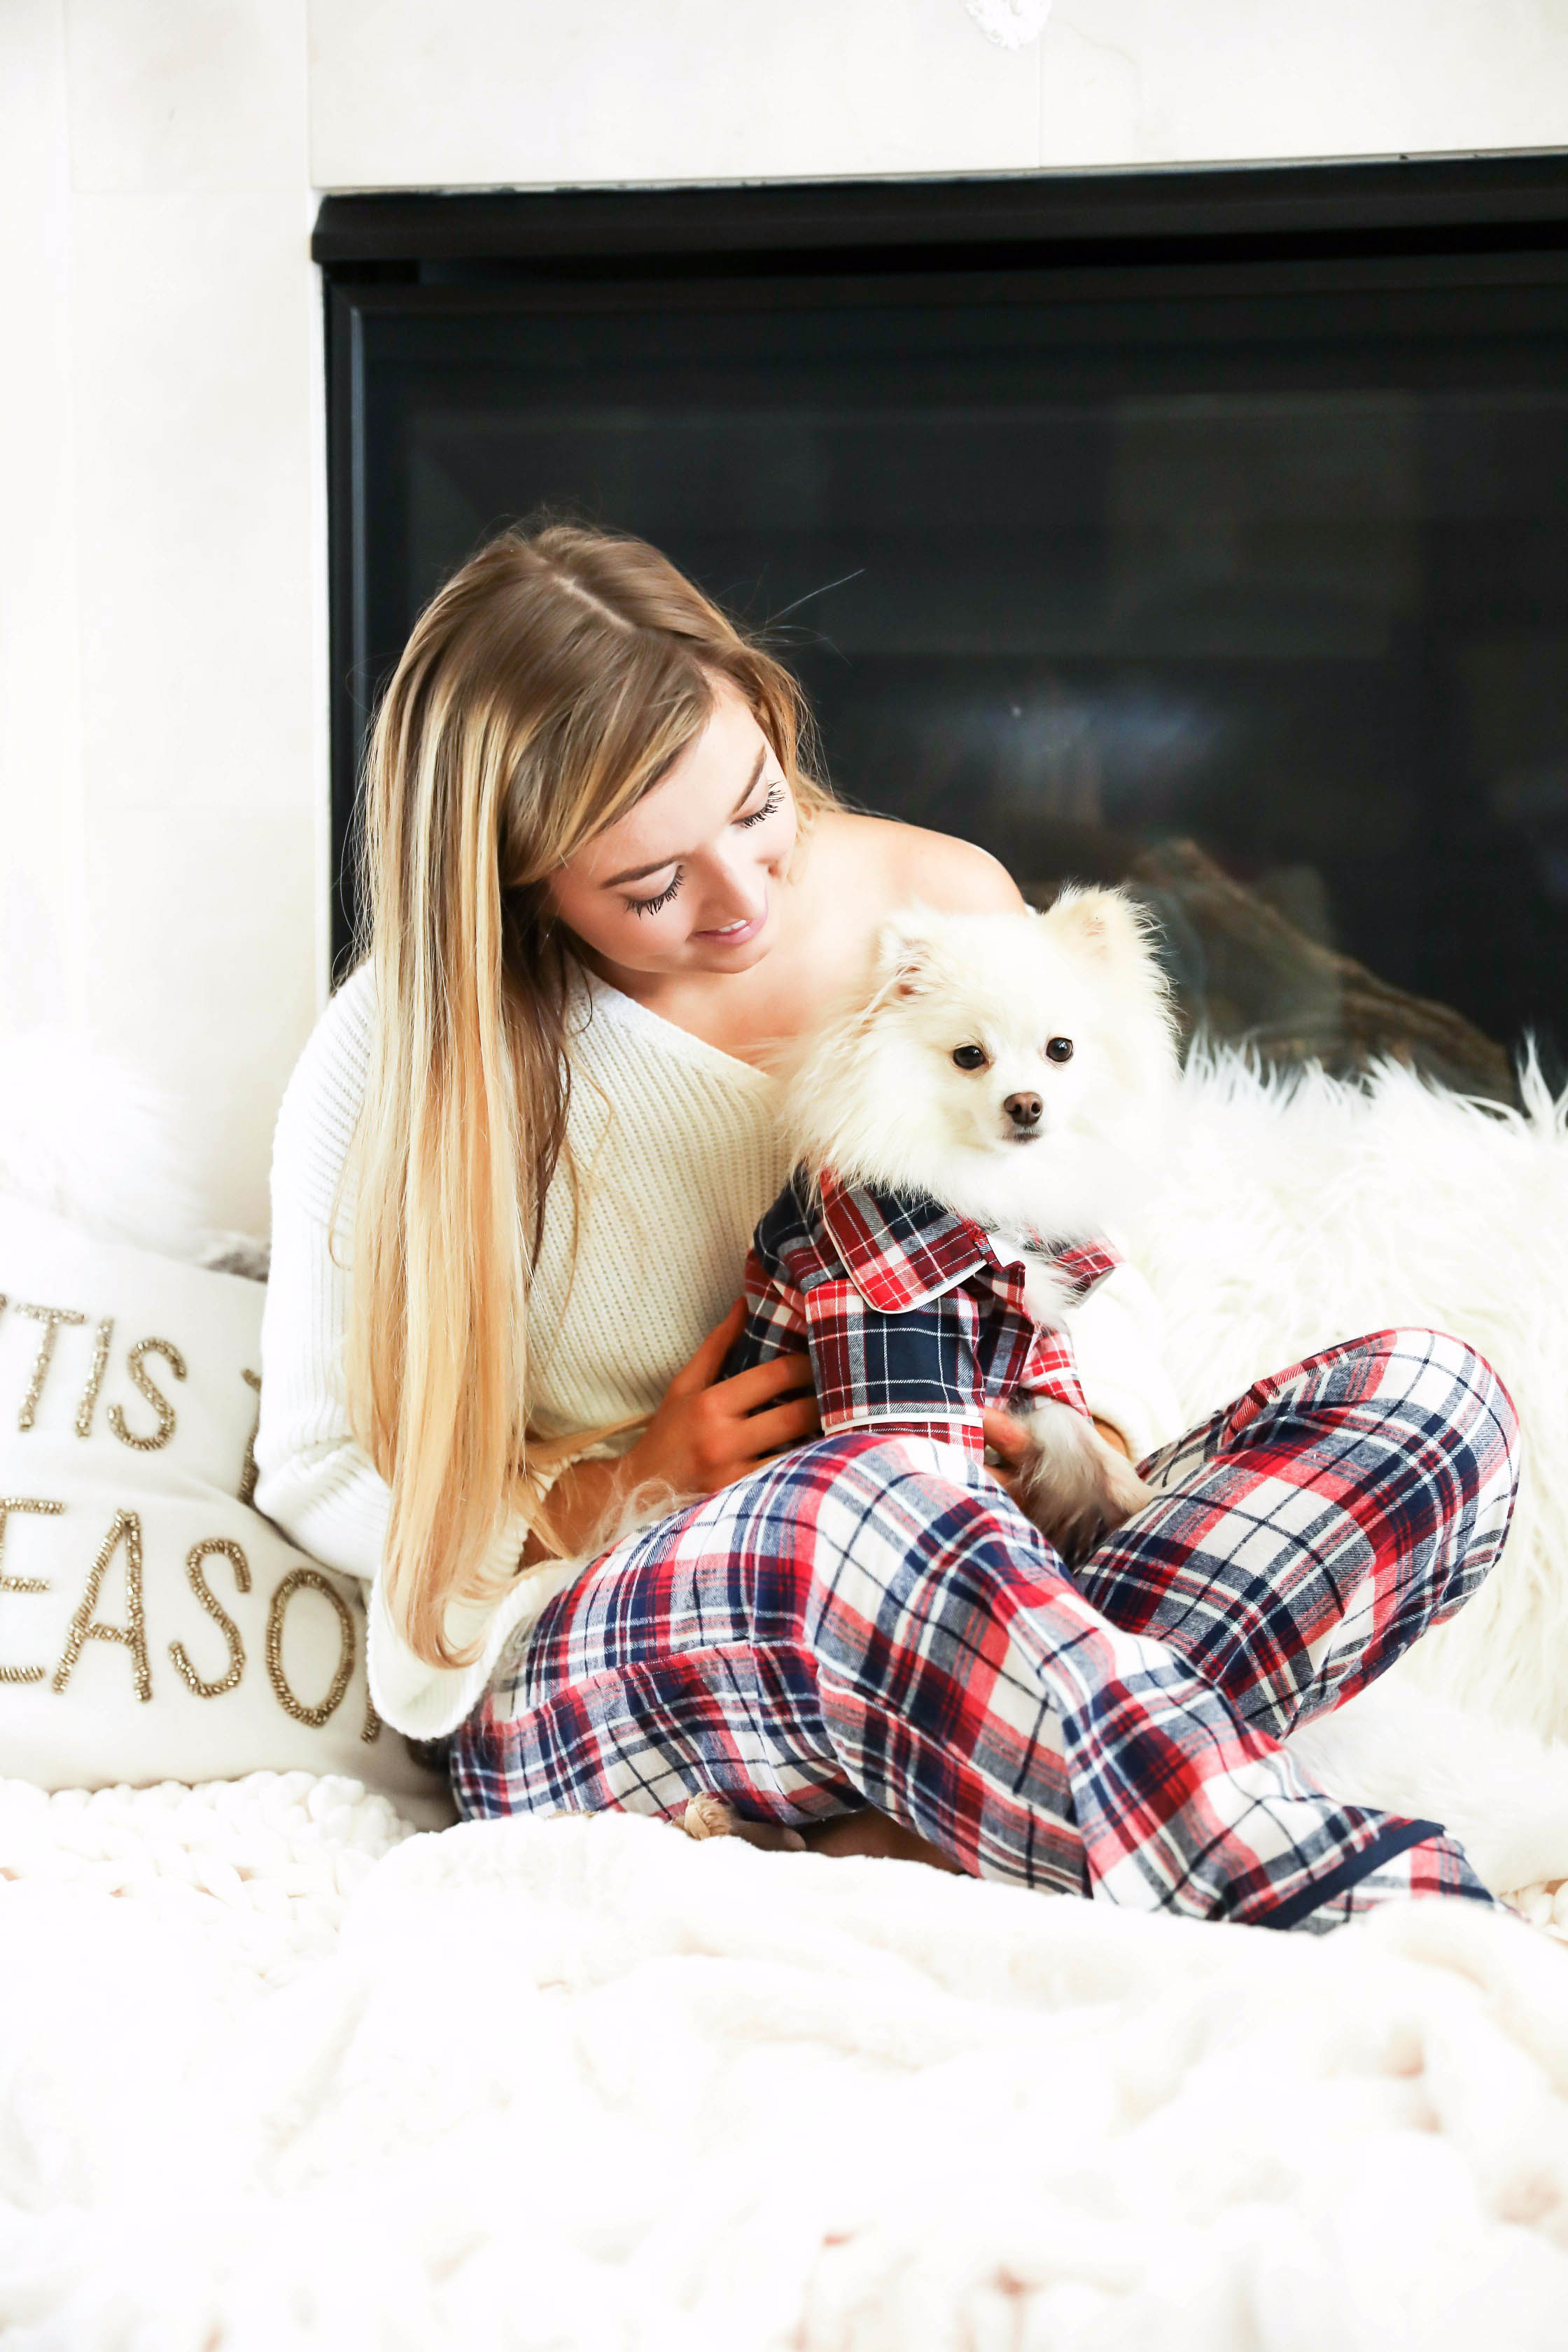 Matching pajamas with dog! Cute plaid matching pajamas with my white pomeranian! The cutest Pomeranian christmas photos! Details on fashion blog daily dose of charm by lauren lindmark